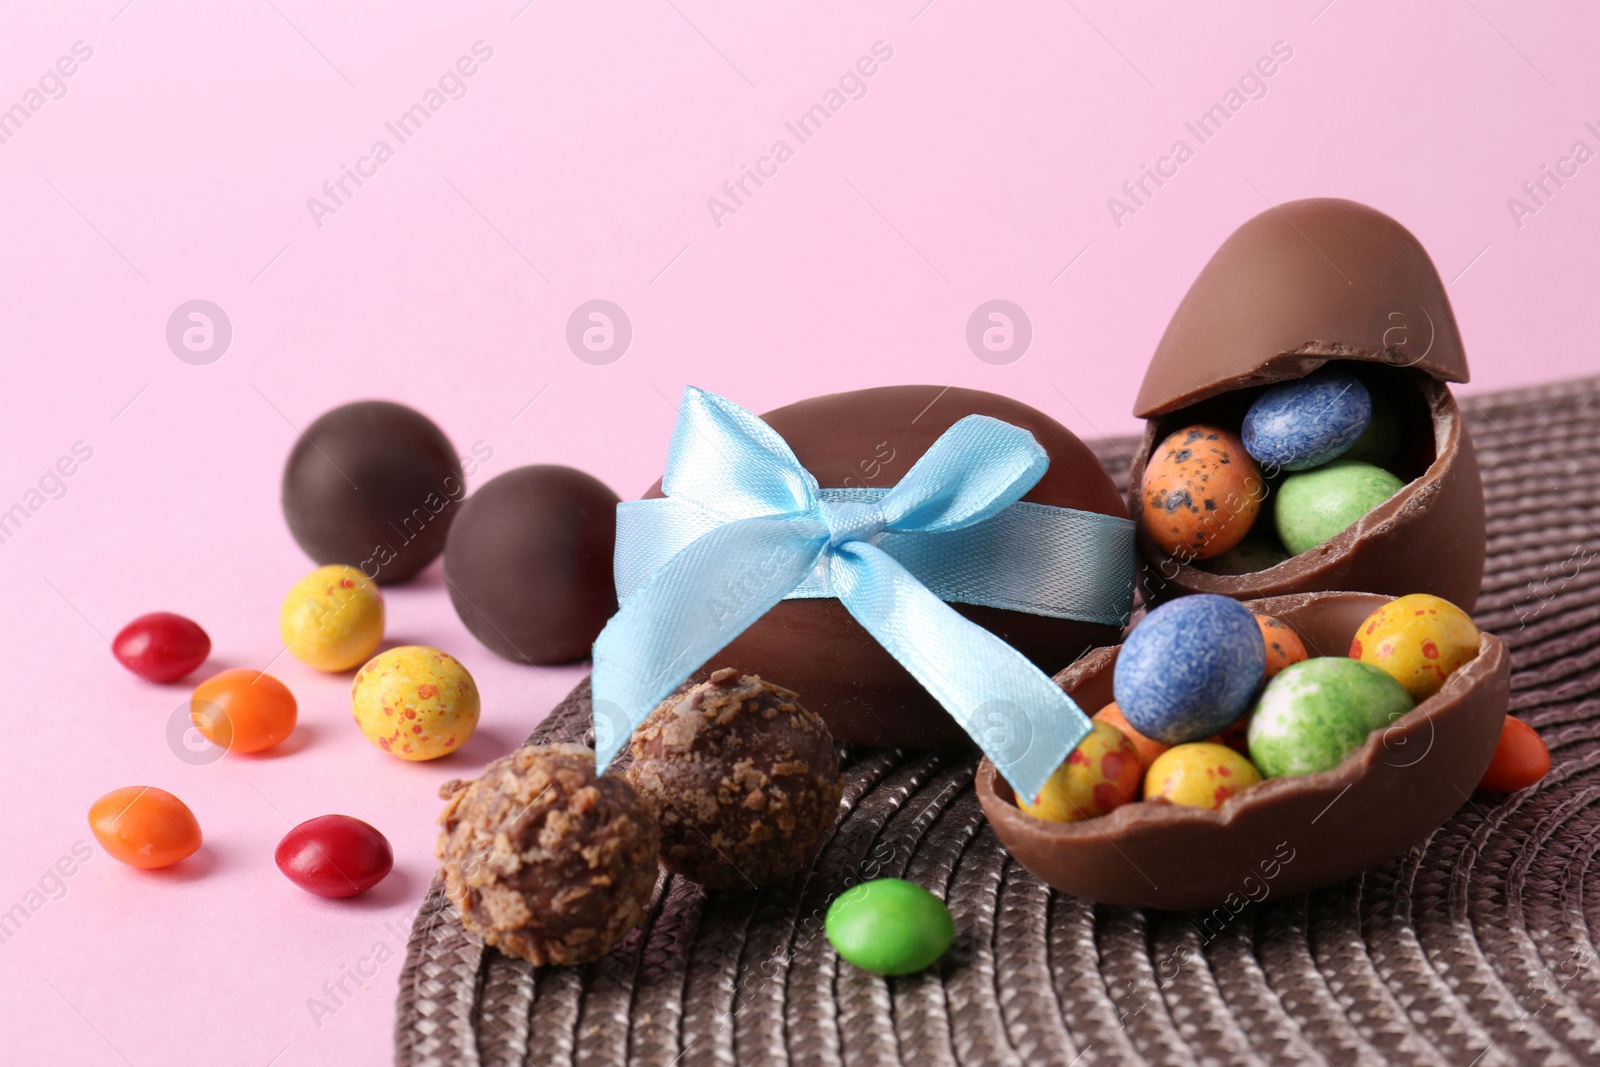 Photo of Tasty chocolate eggs and candies on pink background. Space for text